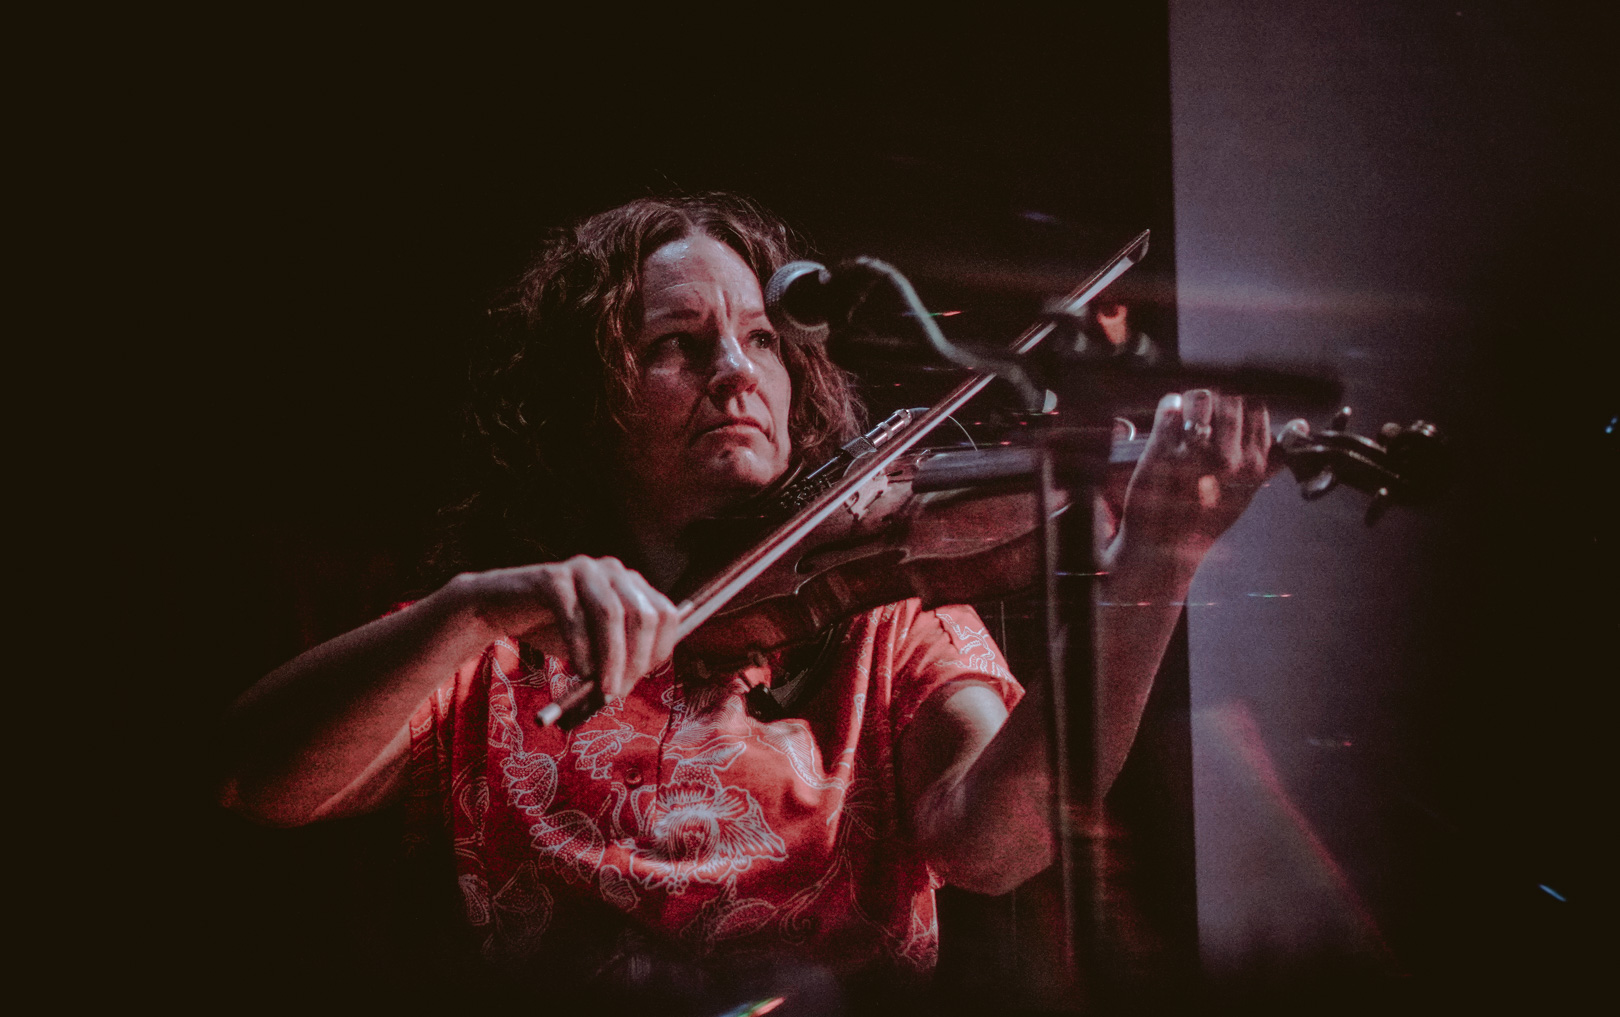 A woman plays violin on stage